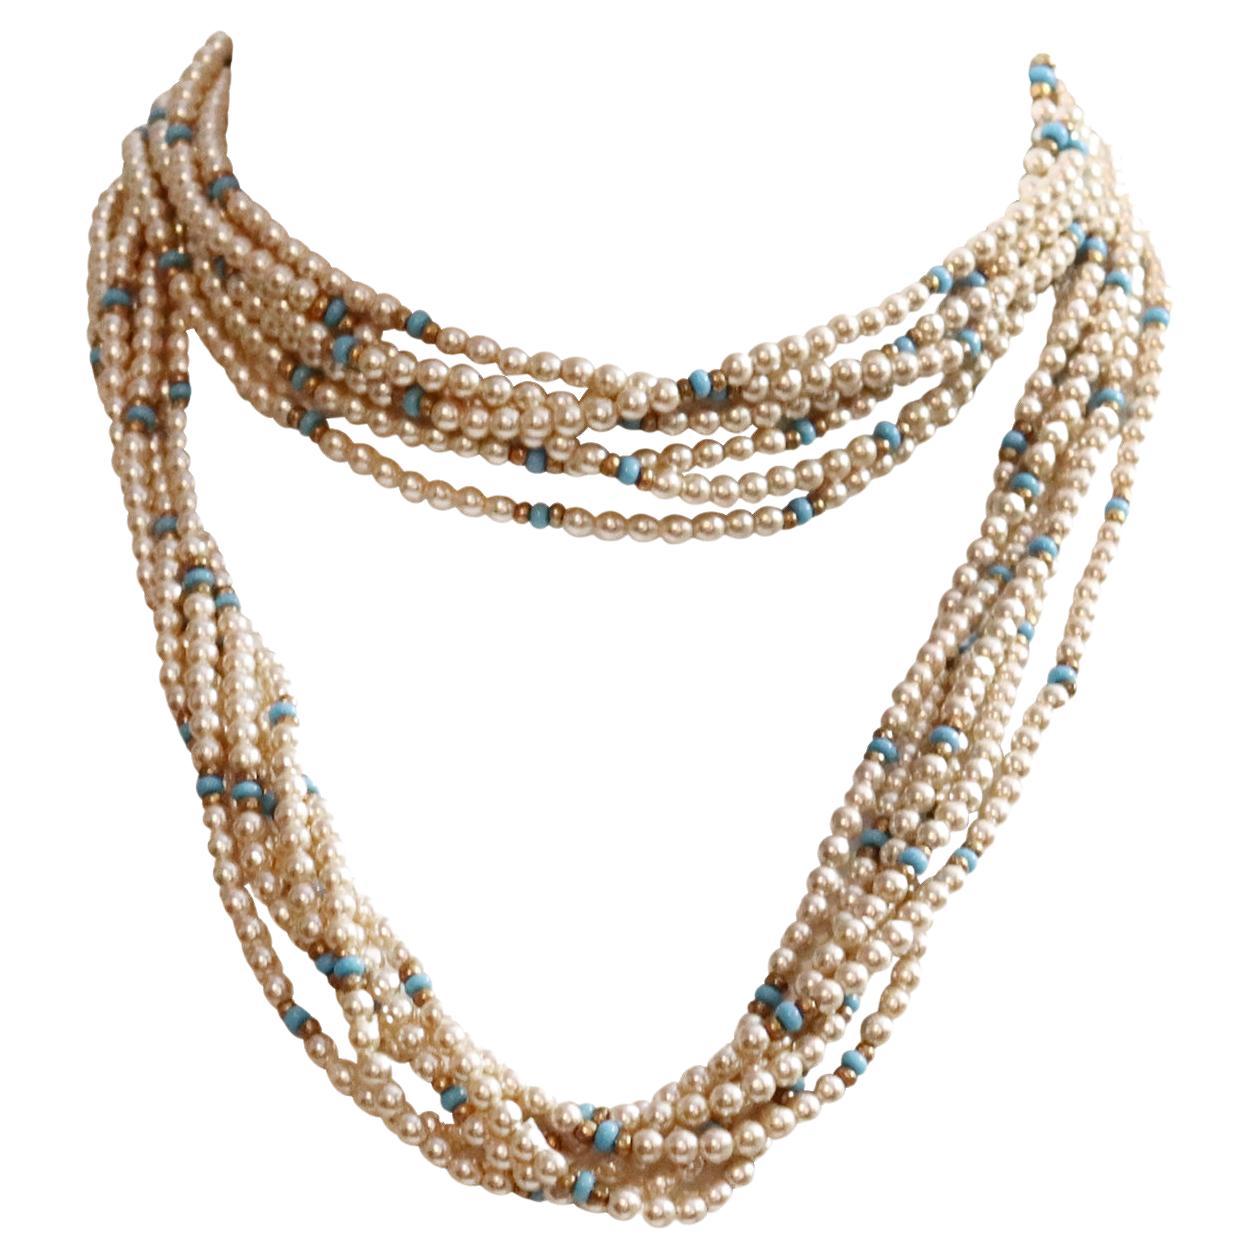 Vintage Faux Pearl and Faux Turquoise With Gold Beads Necklace Circa 1990s For Sale